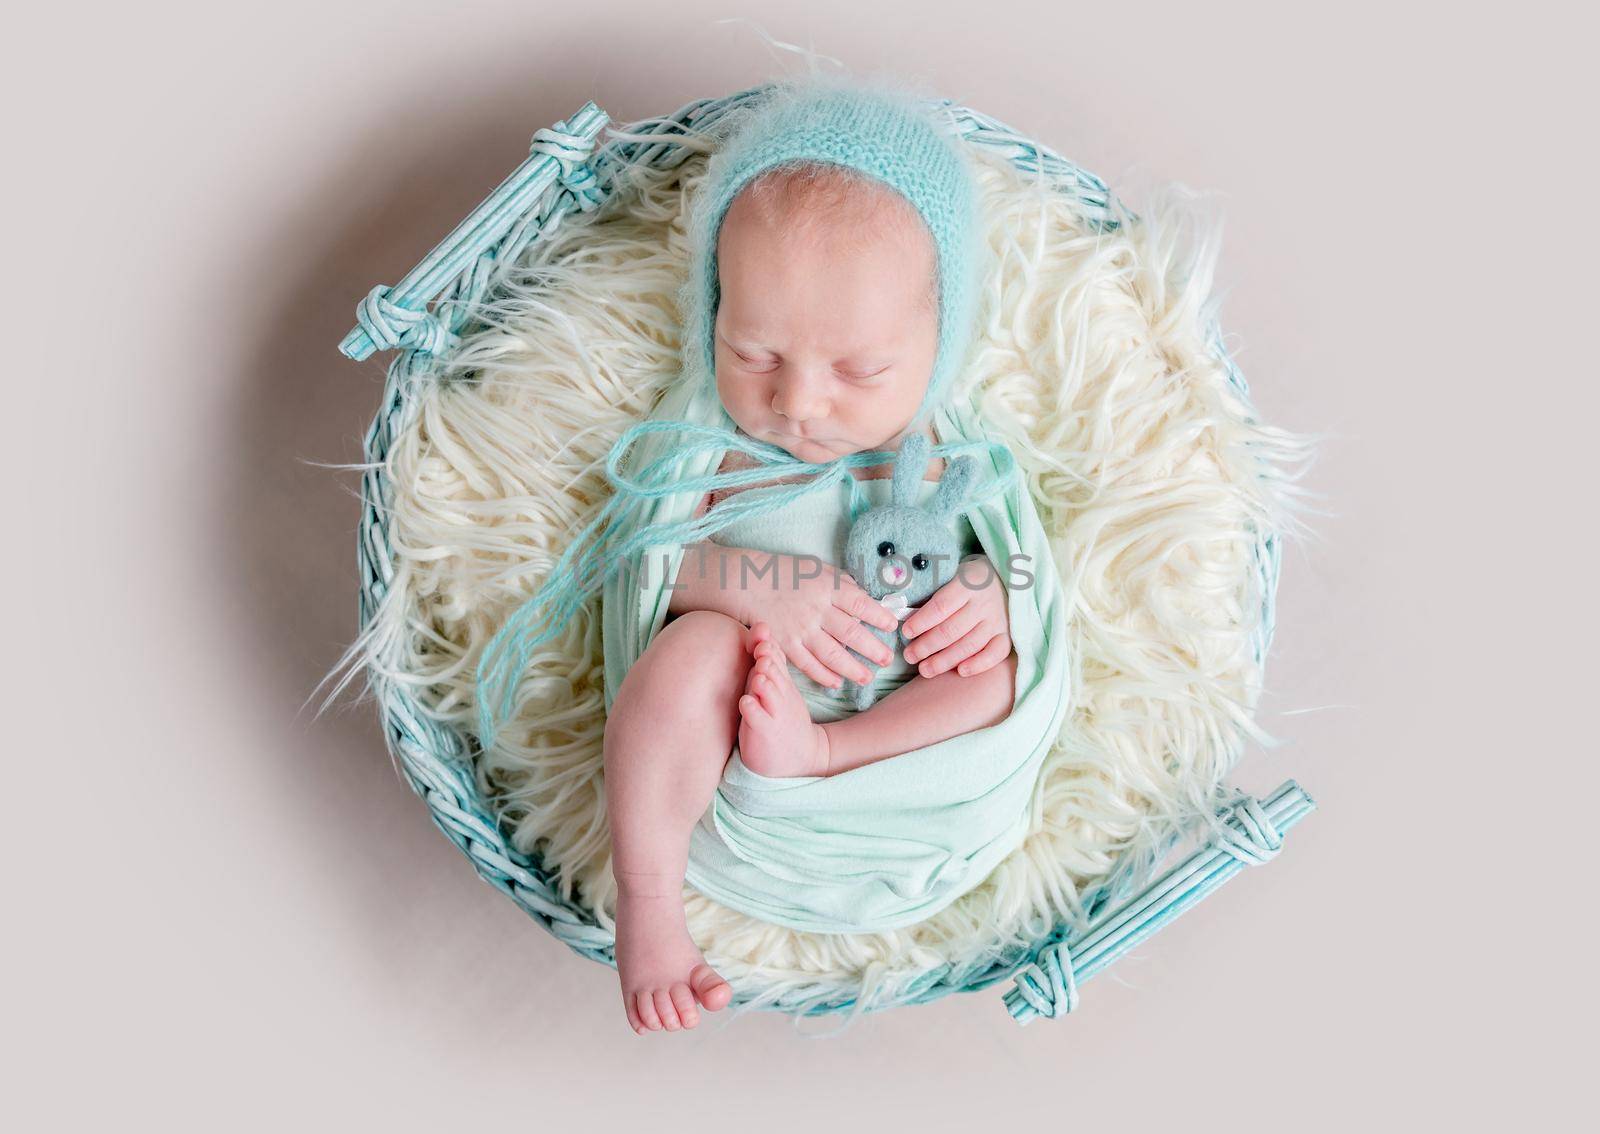 sweet newborn wrapped in a nappy sleeping on a round rug top view